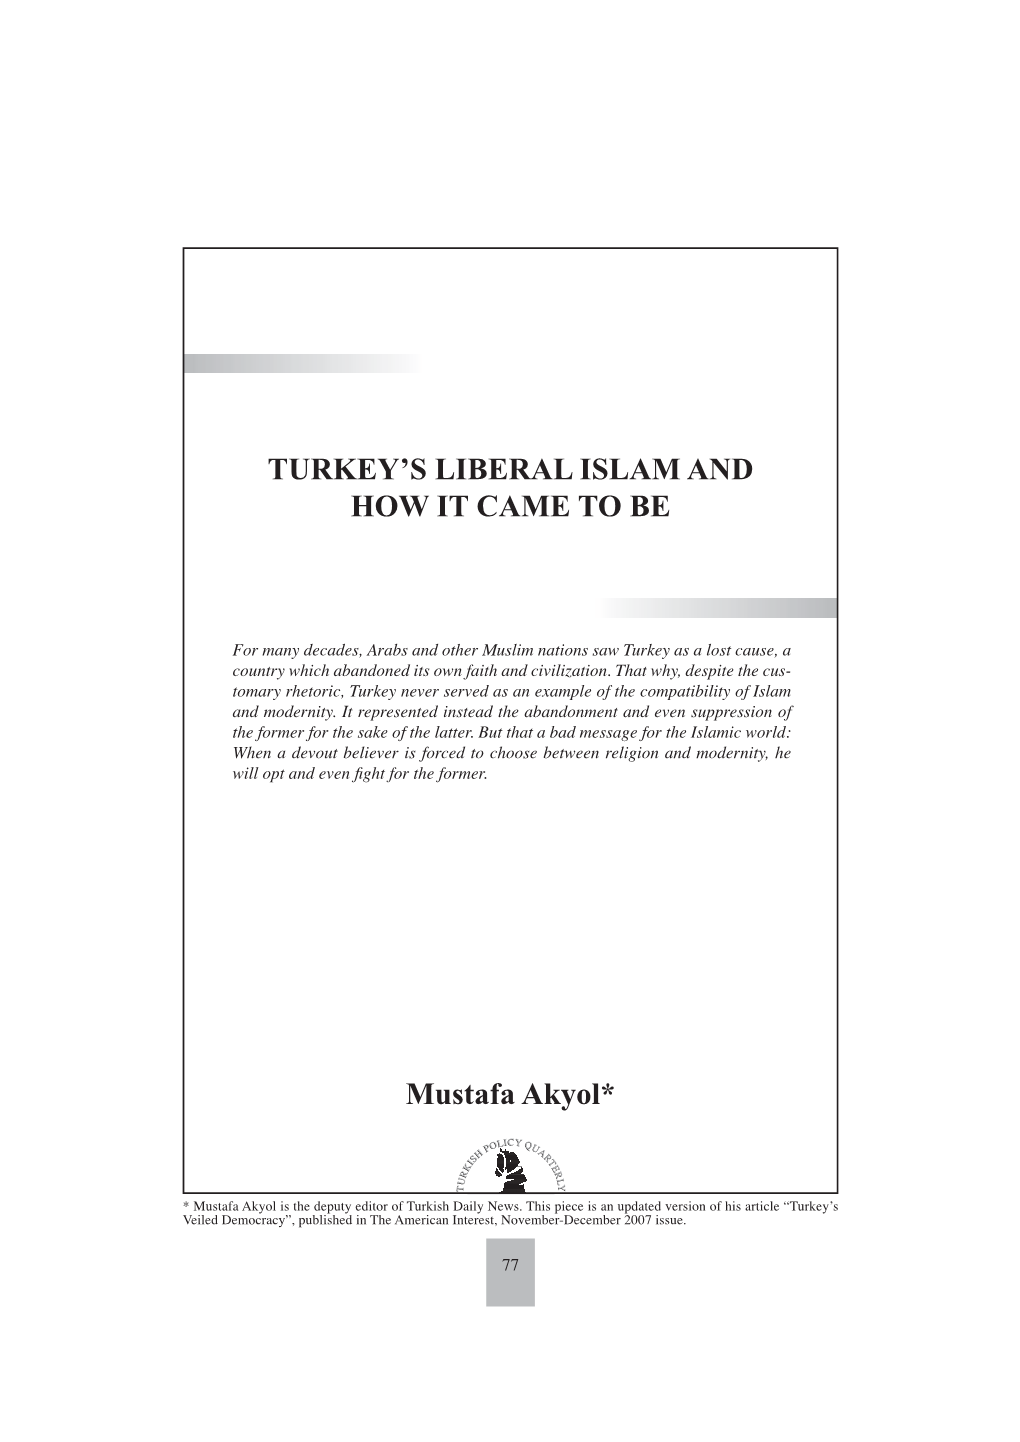 TURKEY's LIBERAL ISLAM and HOW IT CAME to BE Mustafa Akyol*